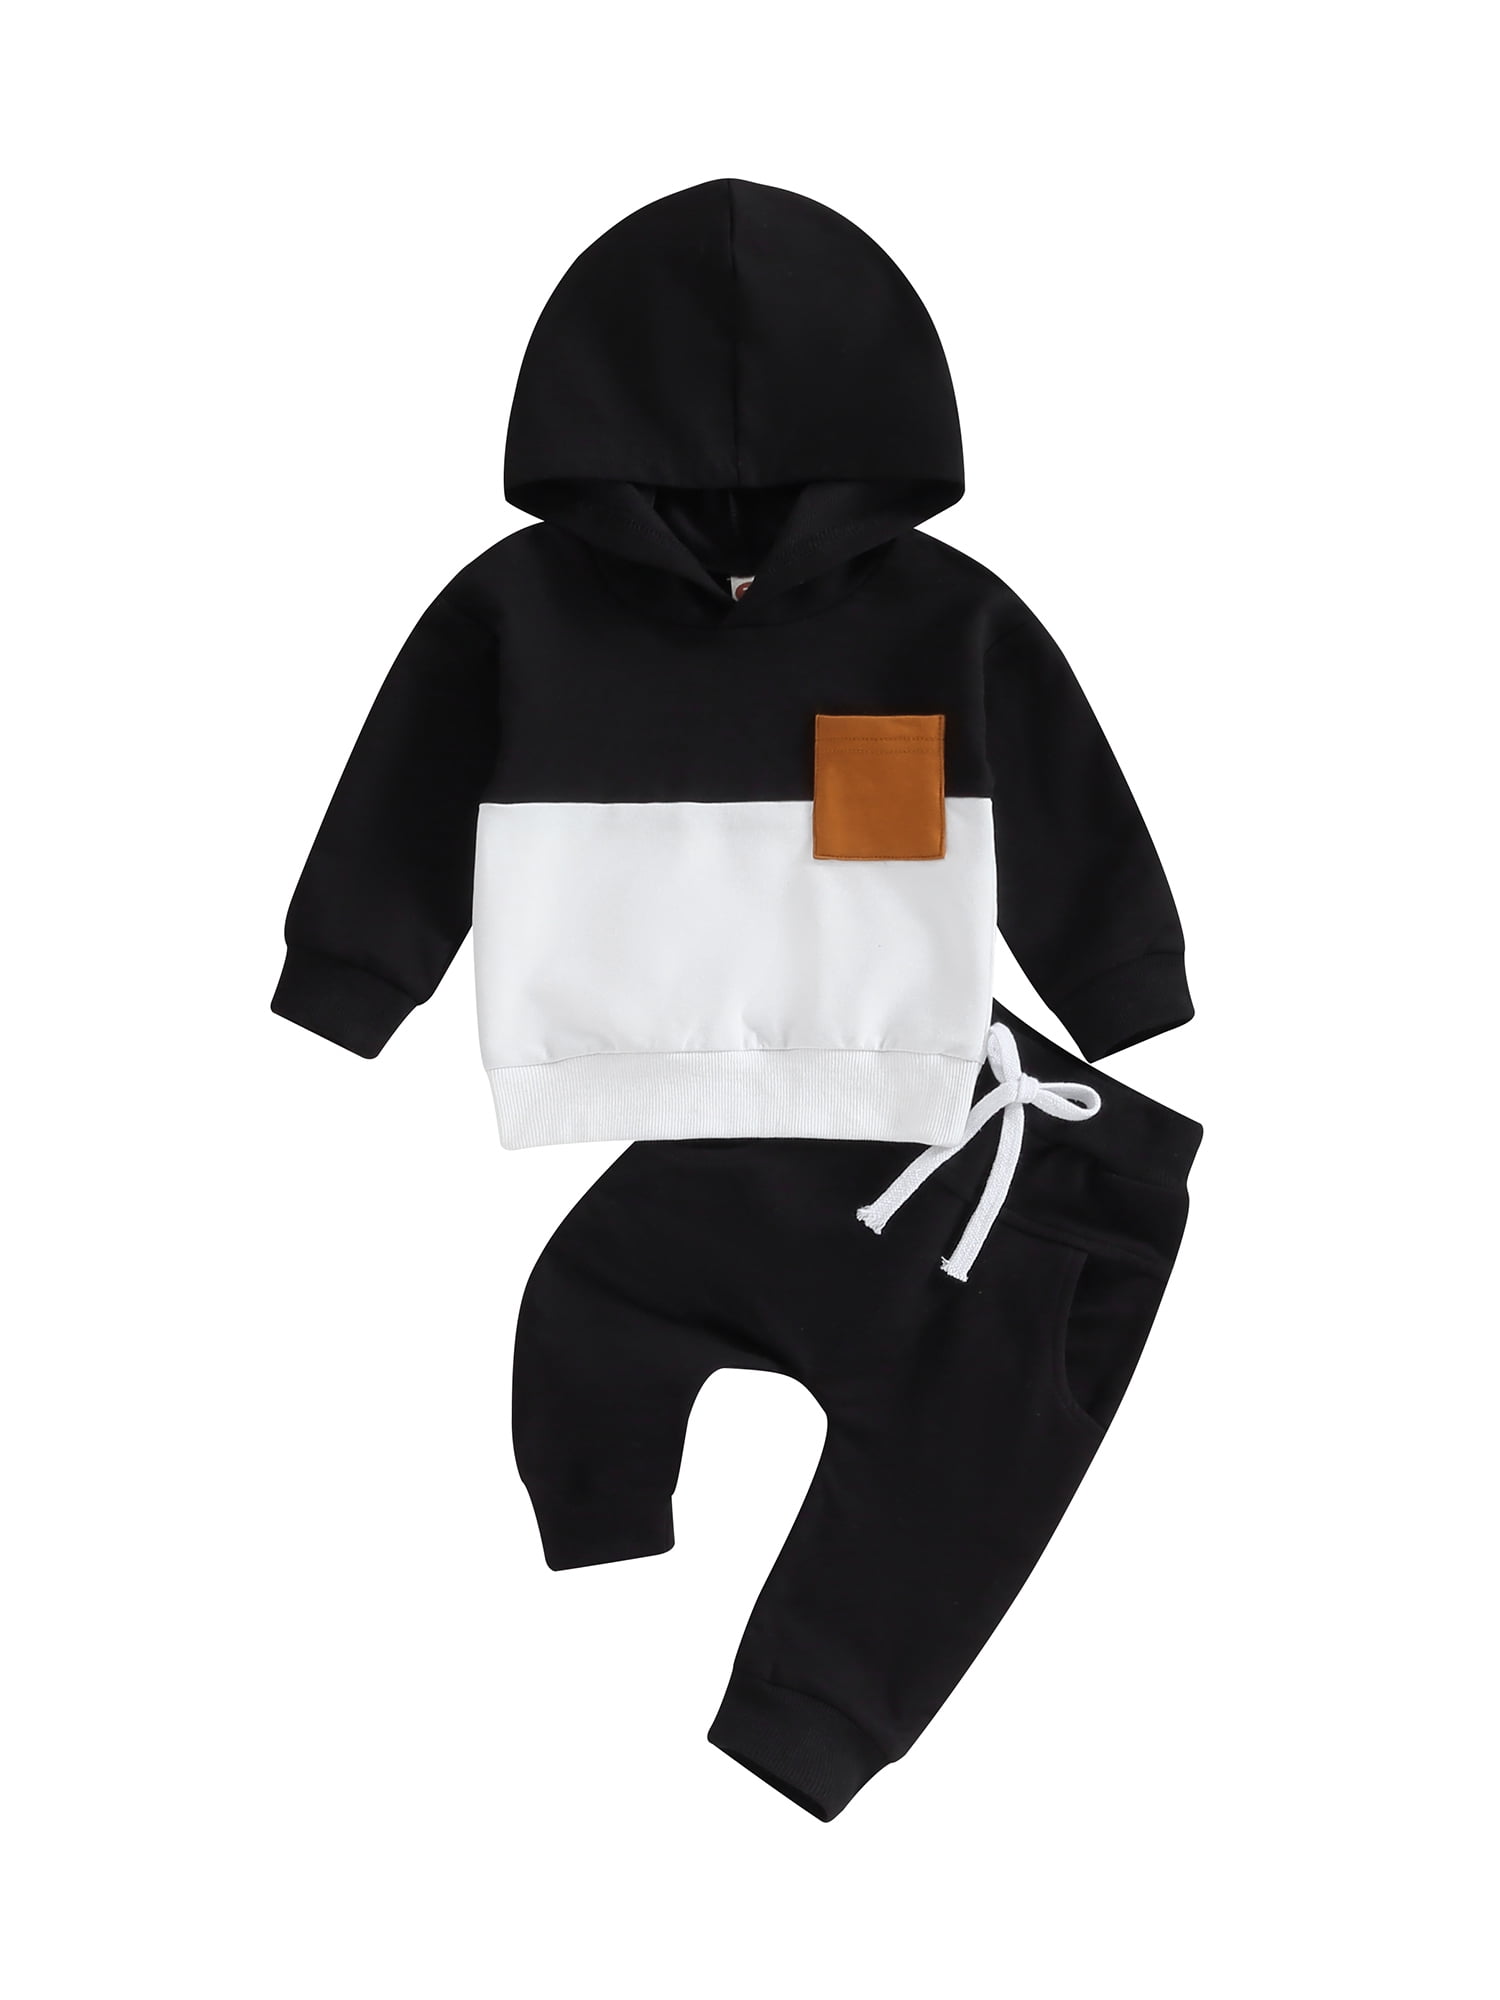 GXFC Baby Boys Fall Tracksuit Outfits Set Clothes 6M 1T 2T 3T Kids Boys ...